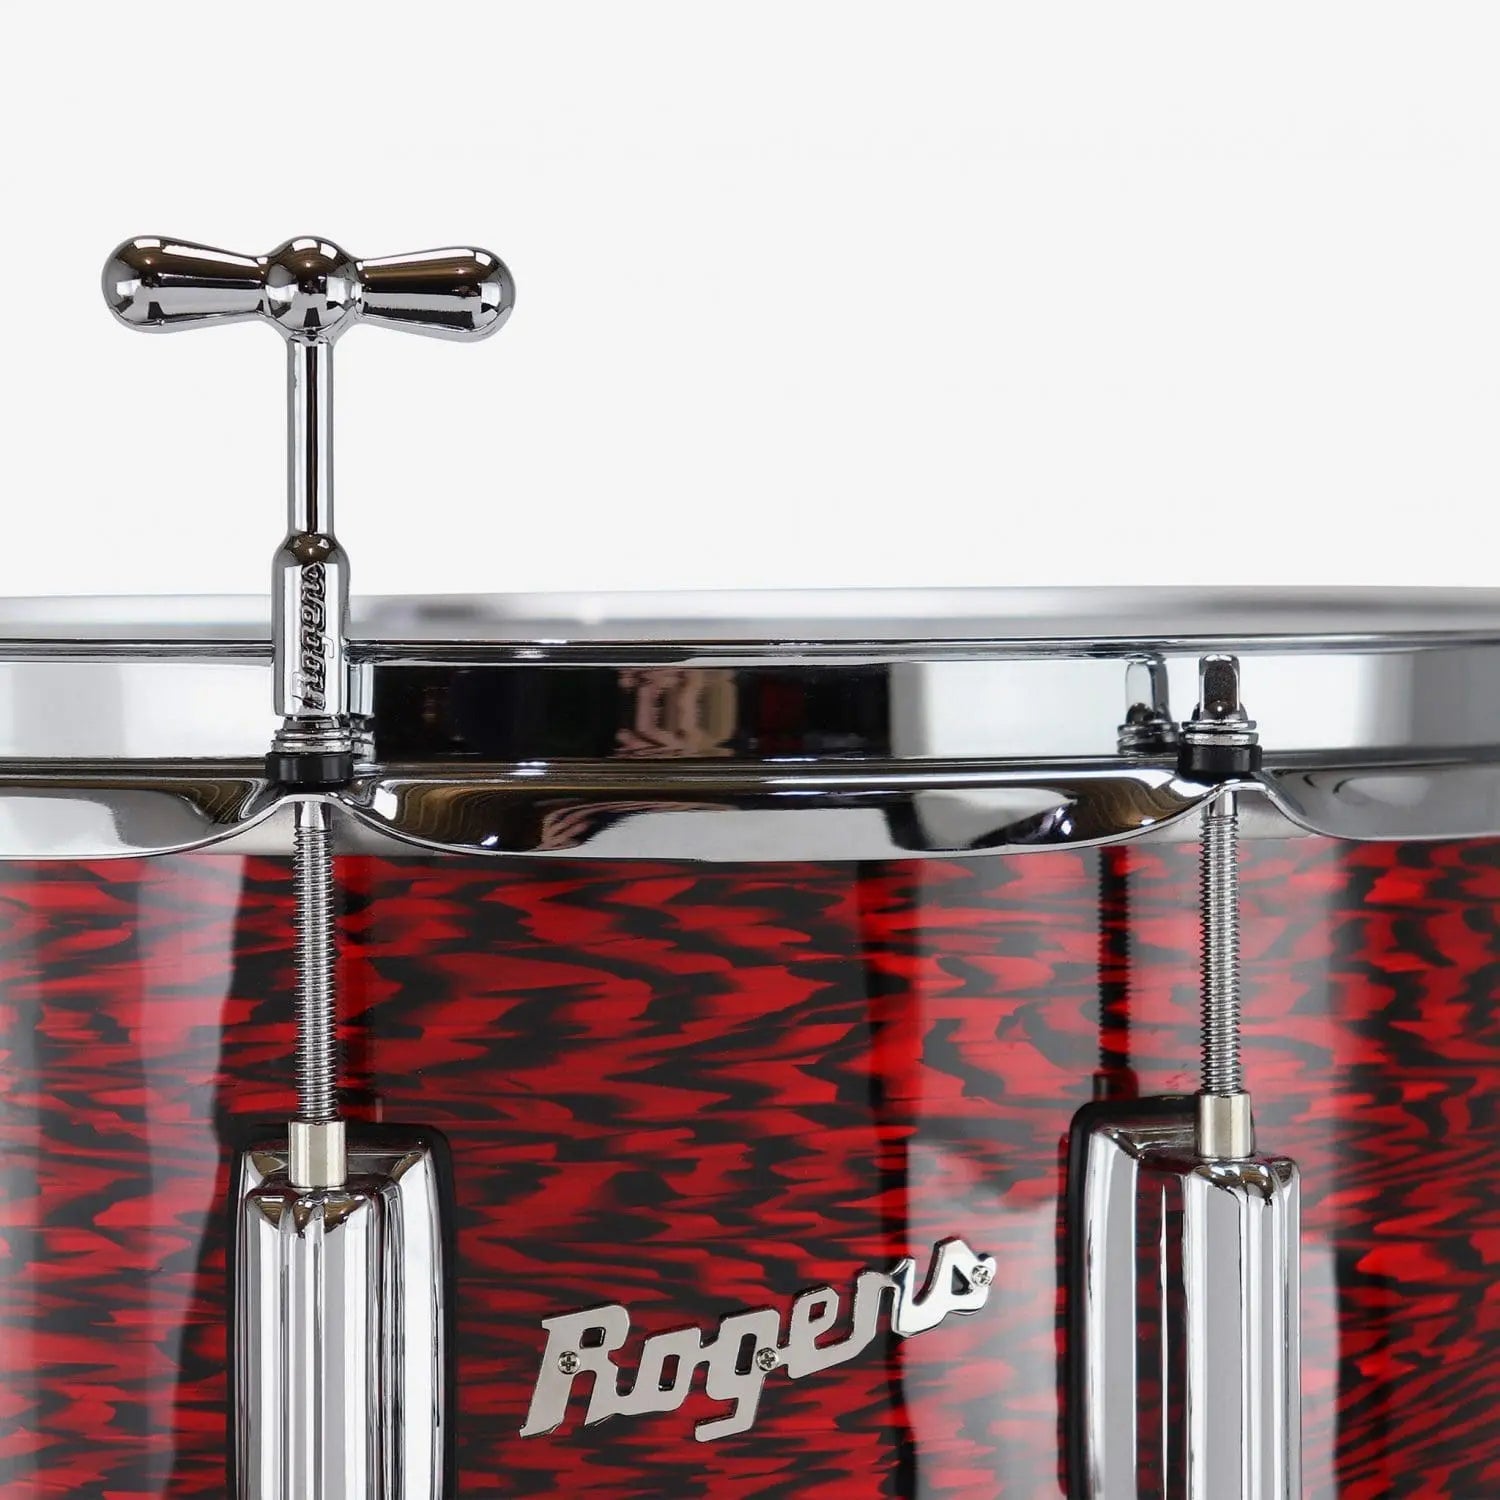 Rogers Bowtie Magnetic Drum Key with Display Box (RABTKEY) NEW DRUM ACCESSORIES Rogers USA 